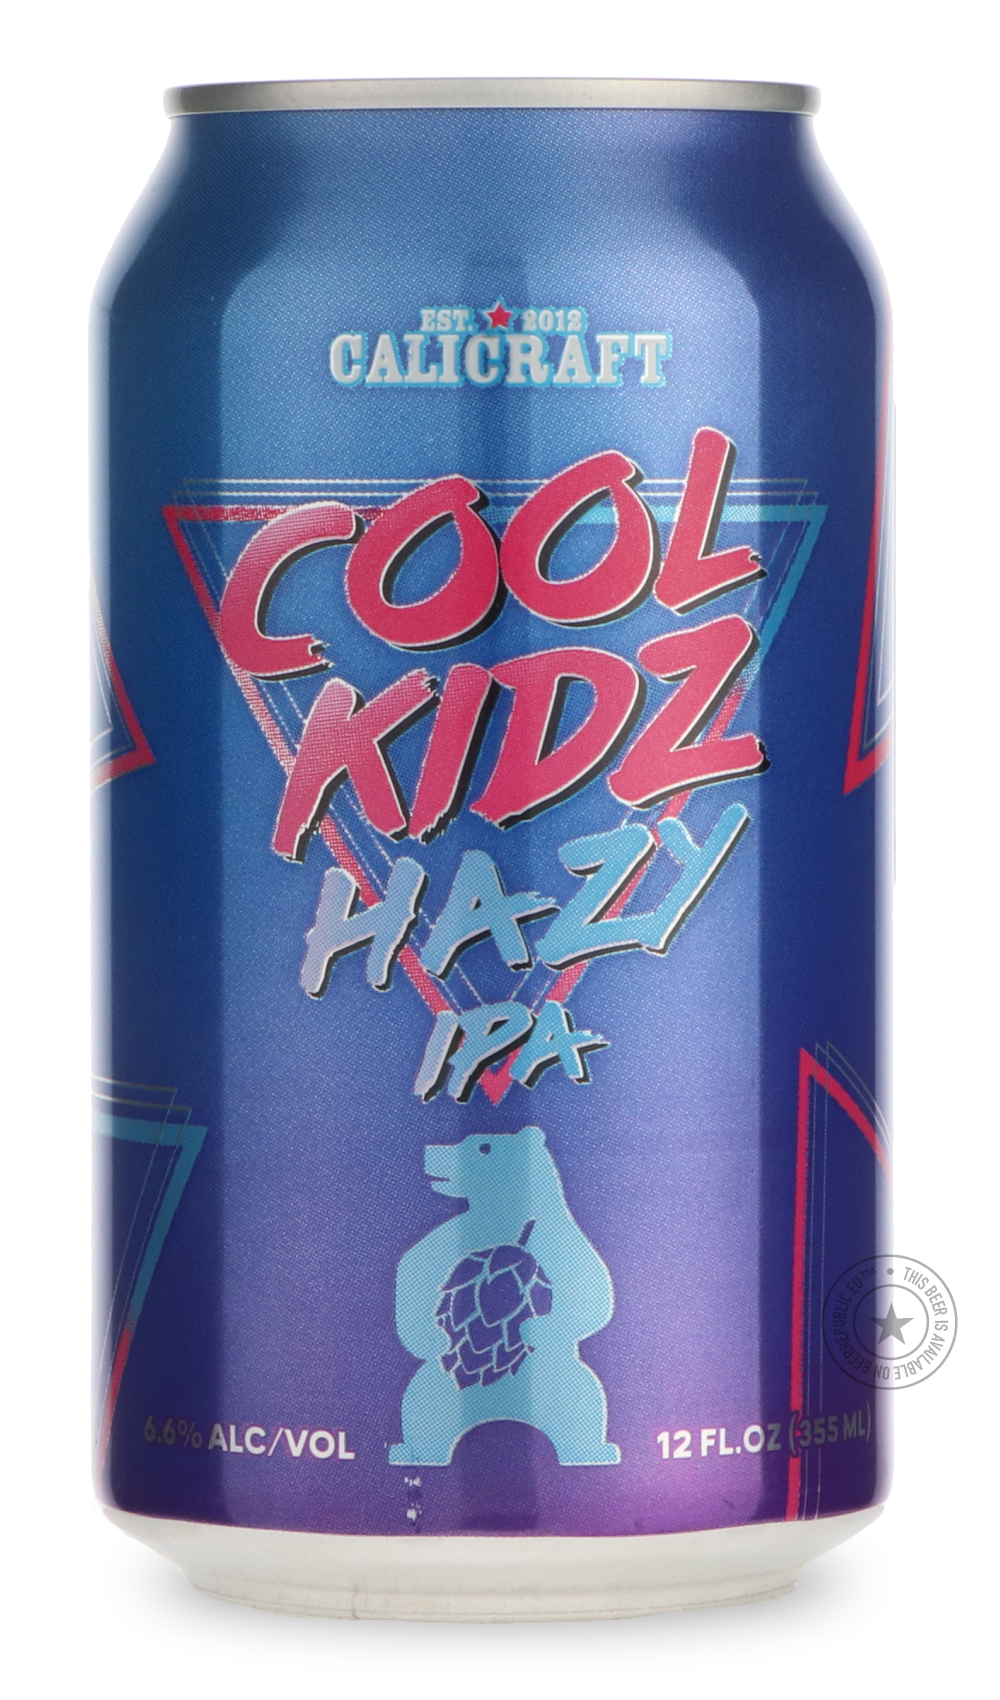 -Calicraft- Cool Kidz Hazy-IPA- Only @ Beer Republic - The best online beer store for American & Canadian craft beer - Buy beer online from the USA and Canada - Bier online kopen - Amerikaans bier kopen - Craft beer store - Craft beer kopen - Amerikanisch bier kaufen - Bier online kaufen - Acheter biere online - IPA - Stout - Porter - New England IPA - Hazy IPA - Imperial Stout - Barrel Aged - Barrel Aged Imperial Stout - Brown - Dark beer - Blond - Blonde - Pilsner - Lager - Wheat - Weizen - Amber - Barley